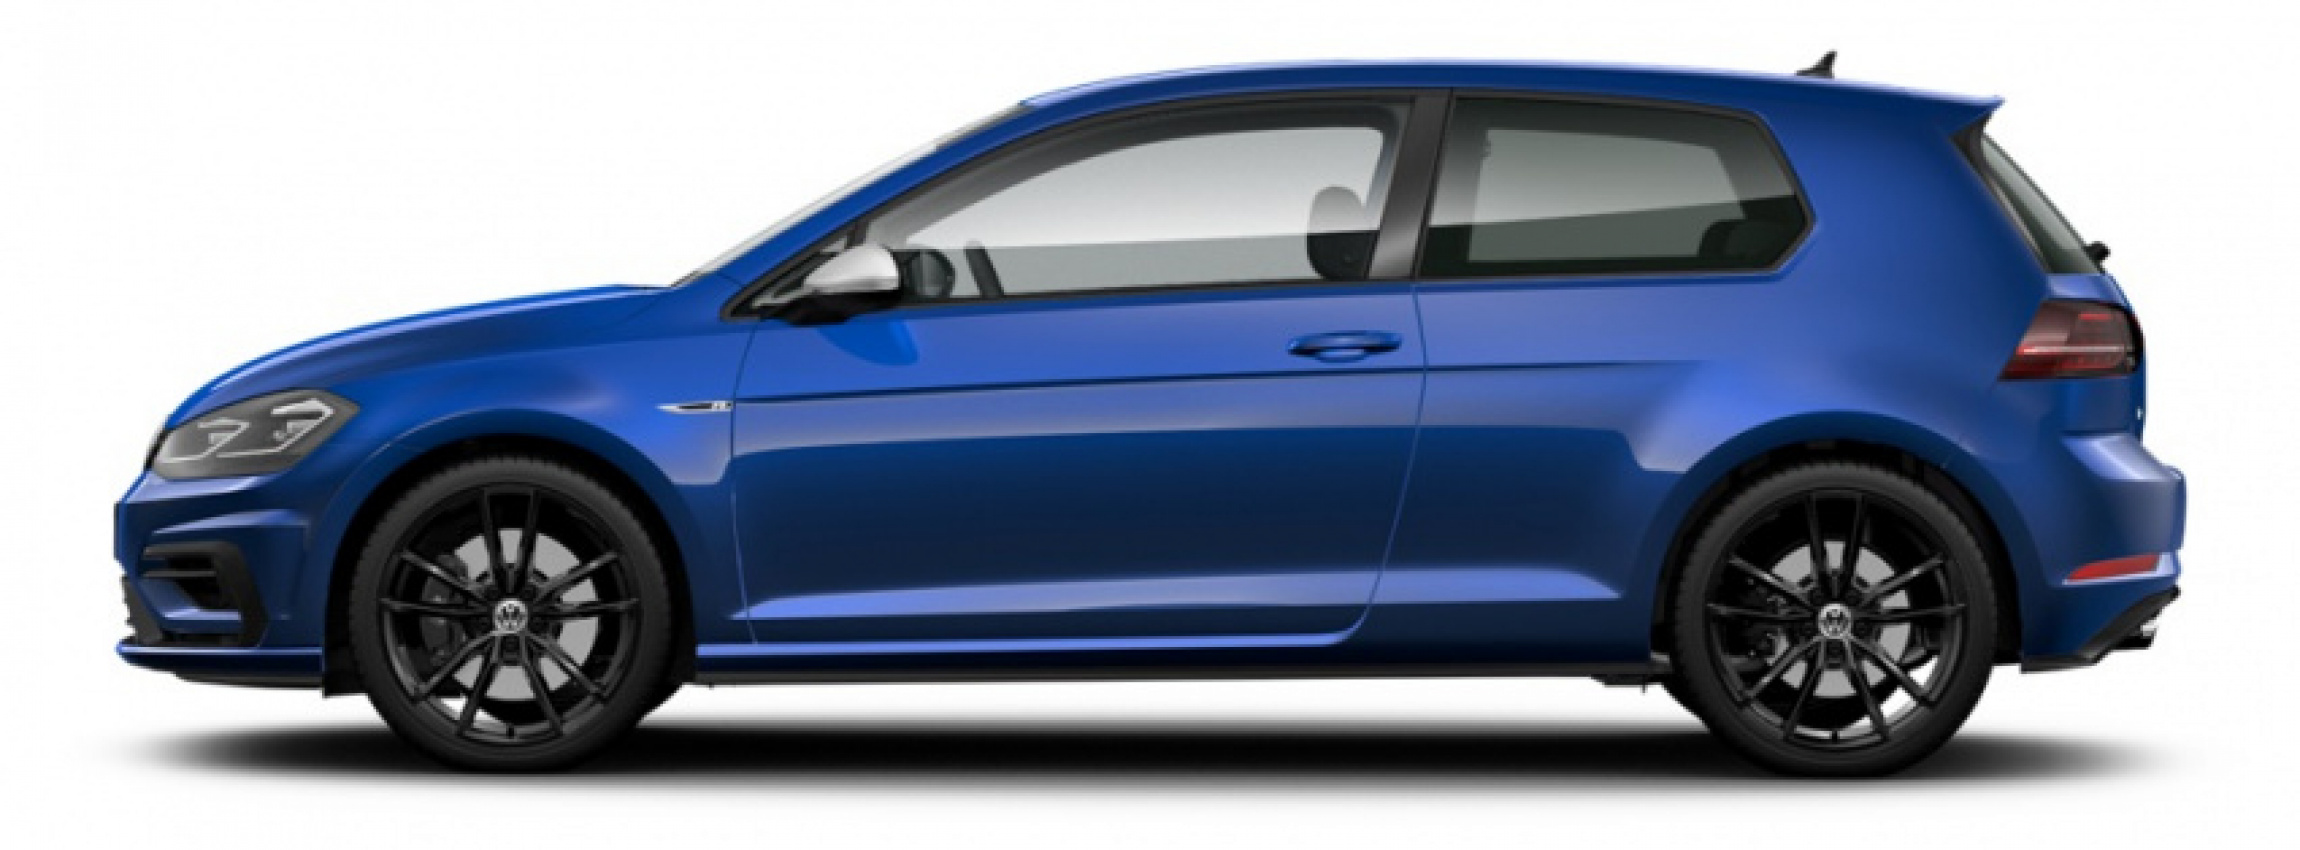 autos, car brands, cars, volkswagen, malaysia, limited units of 3-door volkswagen golf r available in malaysia